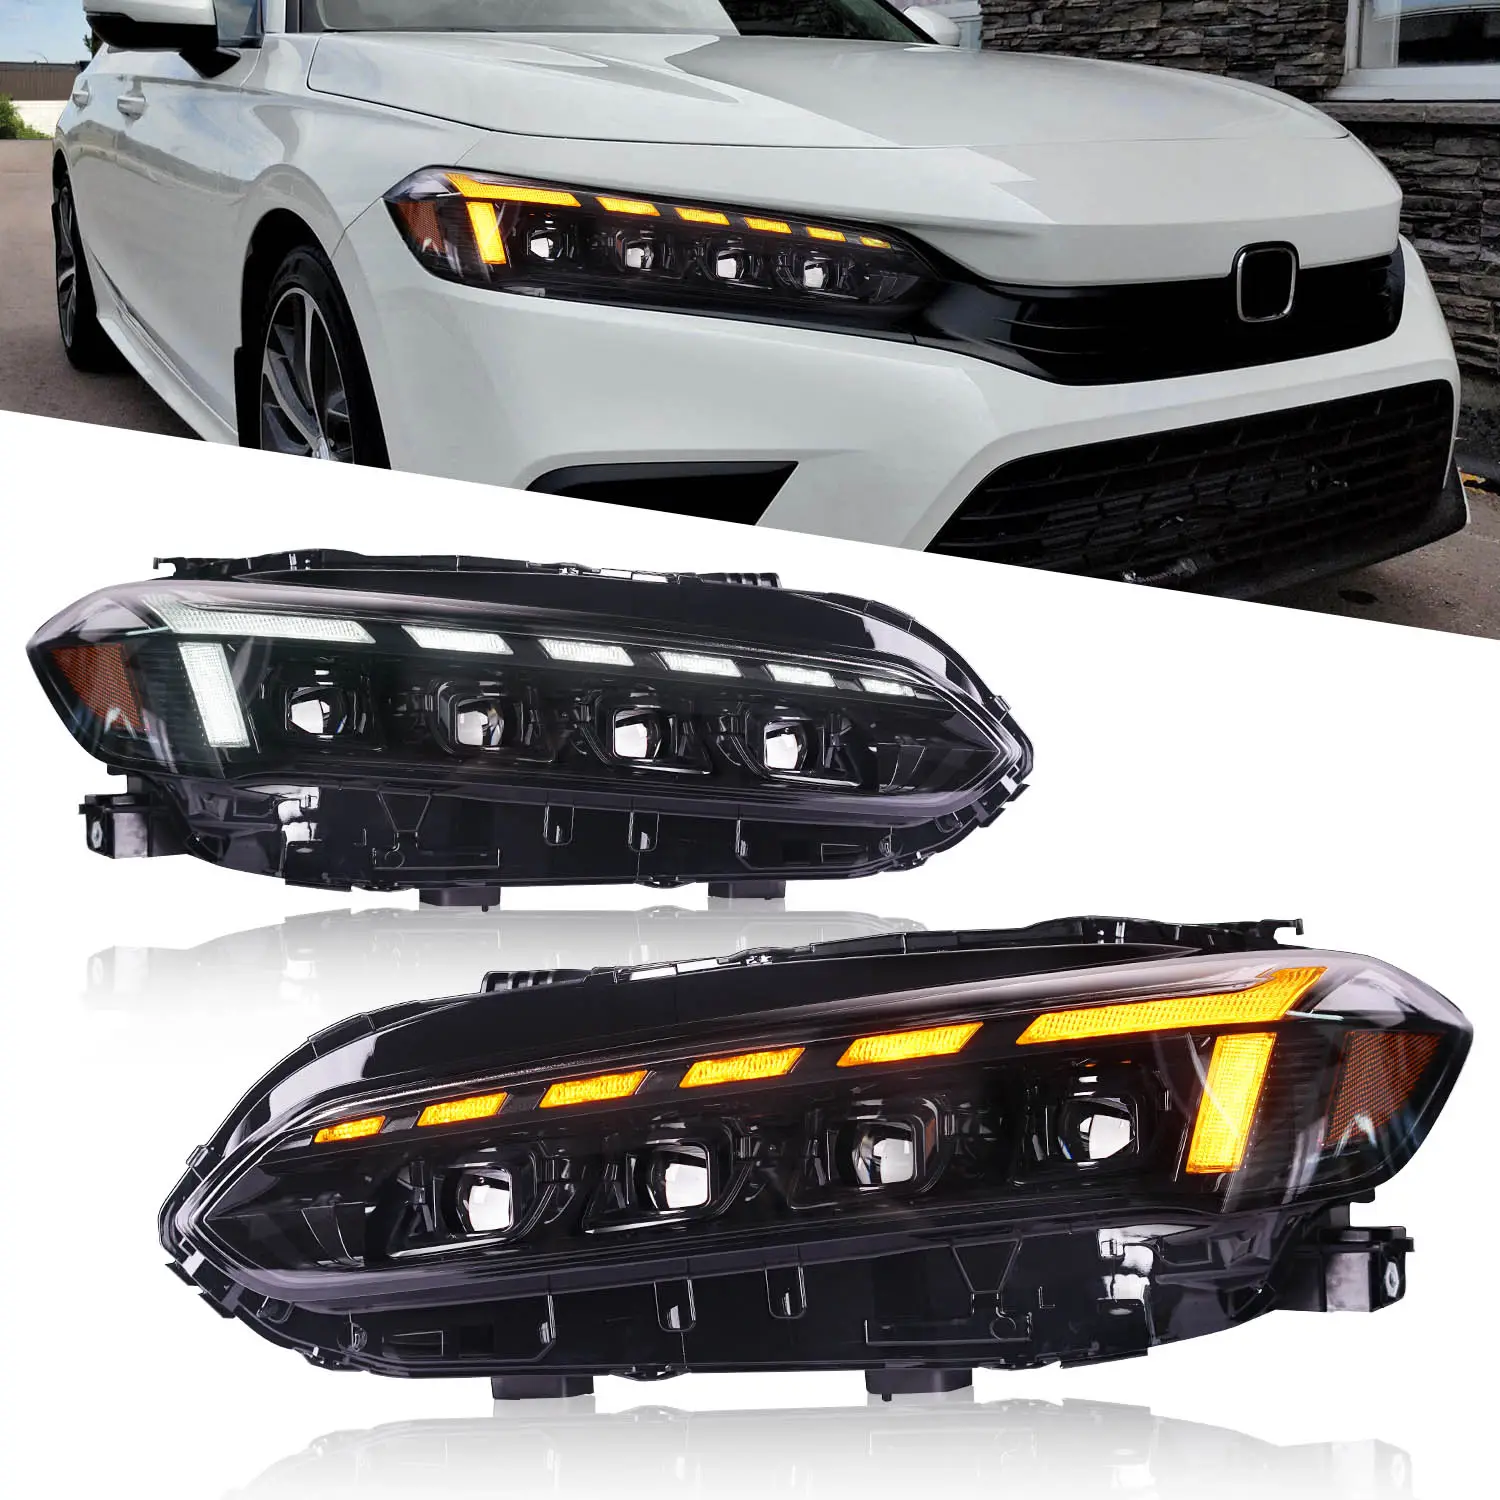 Archaic Full LED Headlight for 11th Gen Honda Civic 2021 2022 with Sequential Turn Signal PLUG & PLAY CIVIC Headlamp